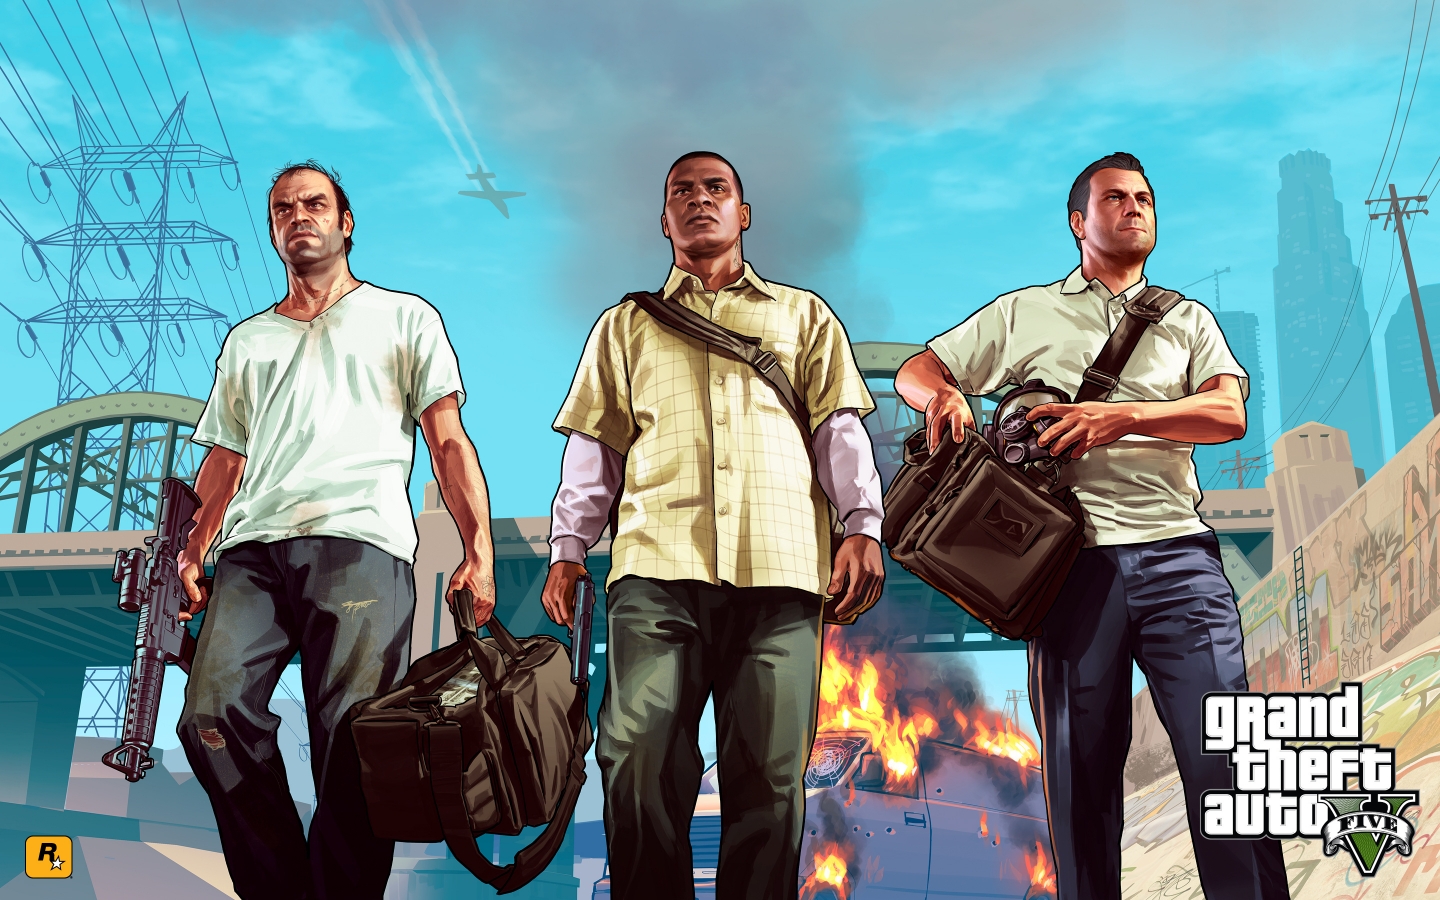 Gta 5 Main Characters for 1440 x 900 widescreen resolution